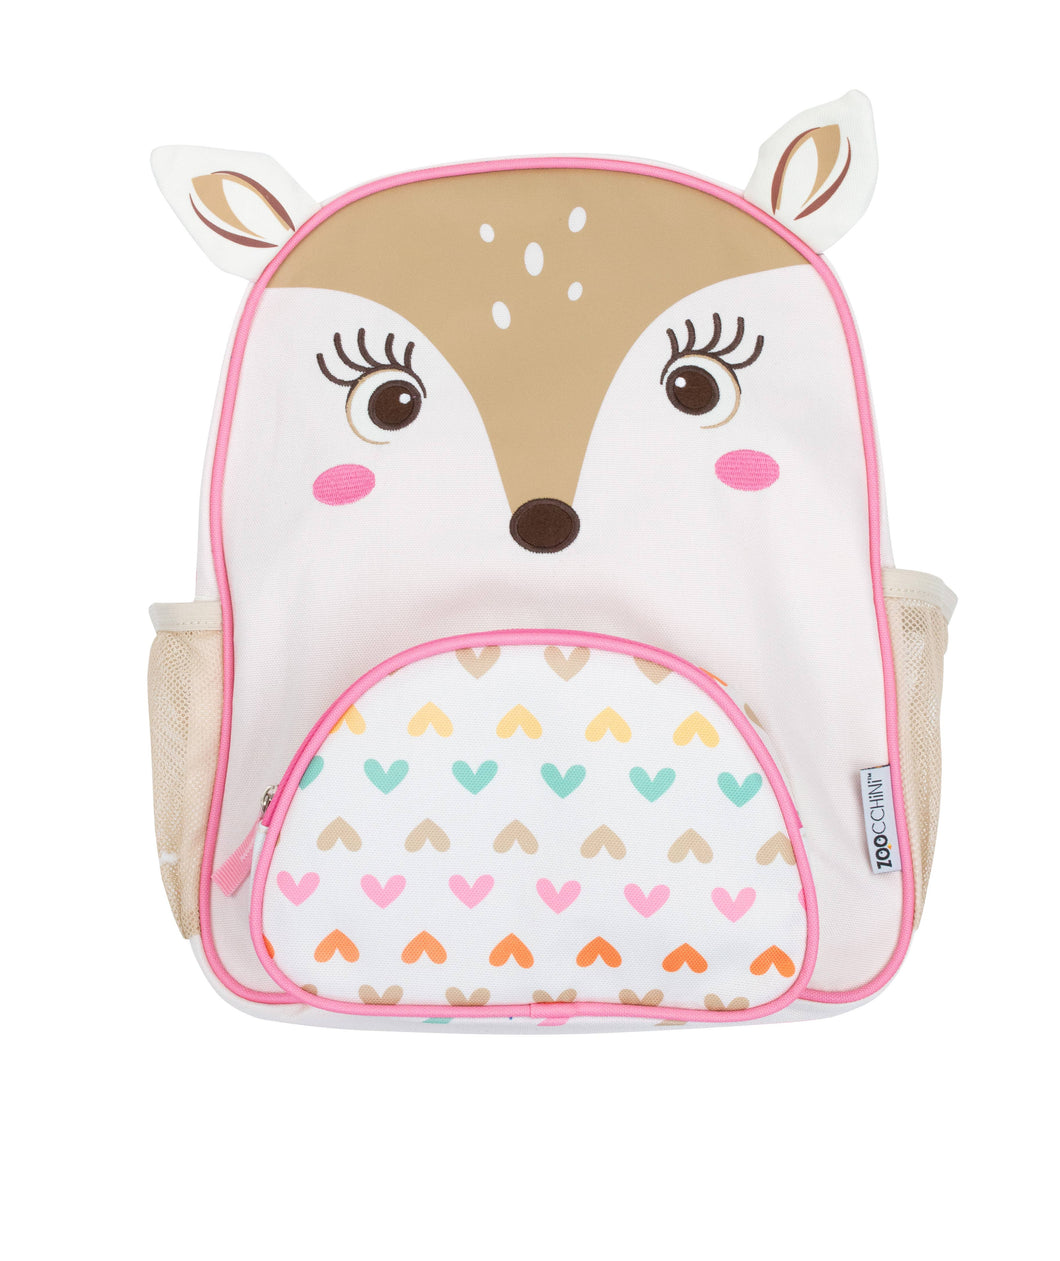 ZOOCCHINI - Zoocchini Kids Everyday Backpack Fiona the Fawn 2Y+